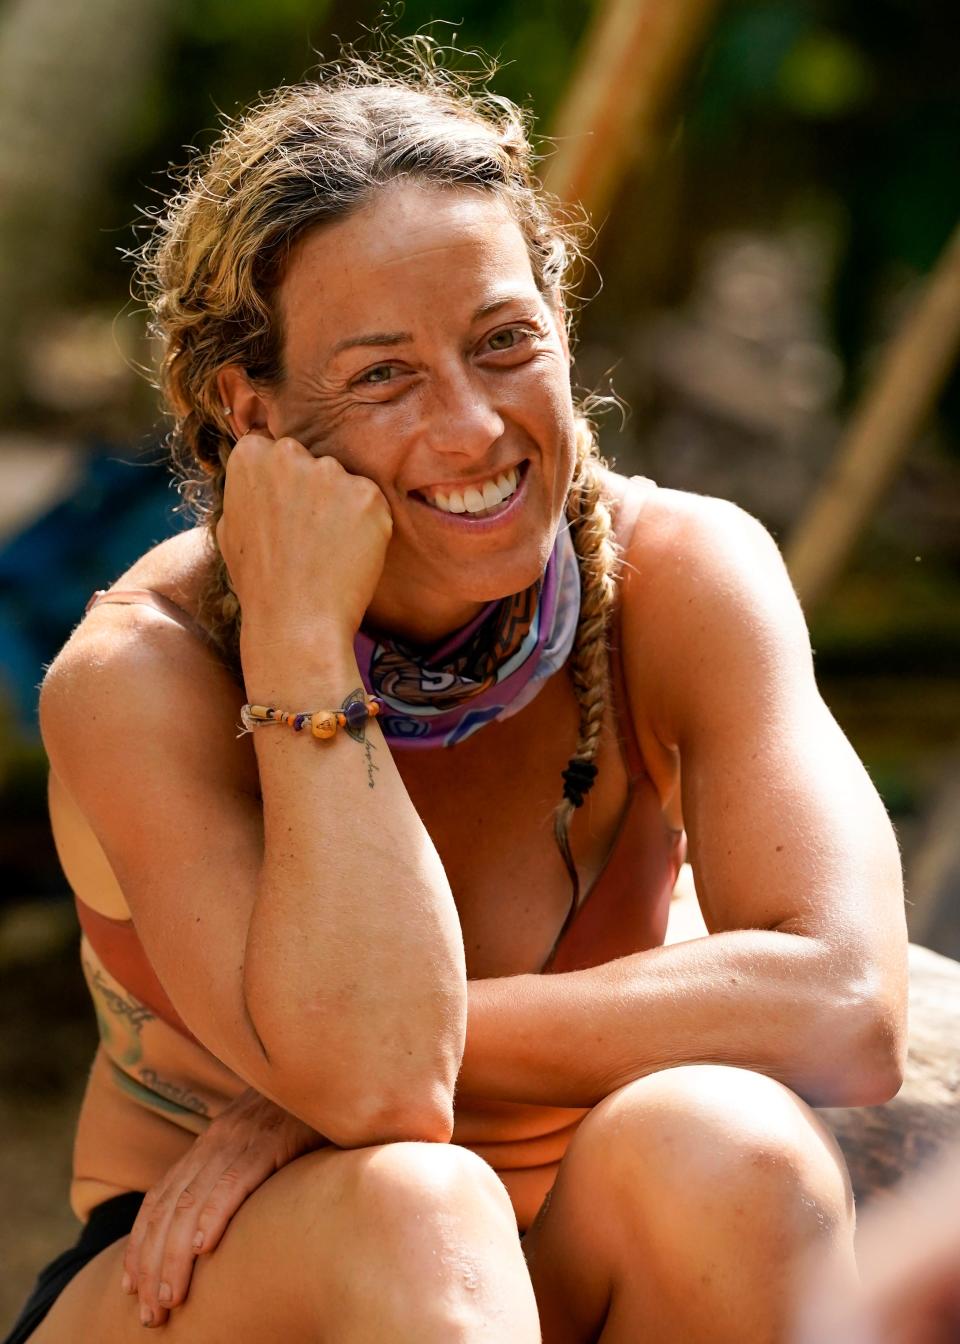 Lindsay Dolashewich was a finalist on the 42nd season of “Survivor” that aired in 2022.